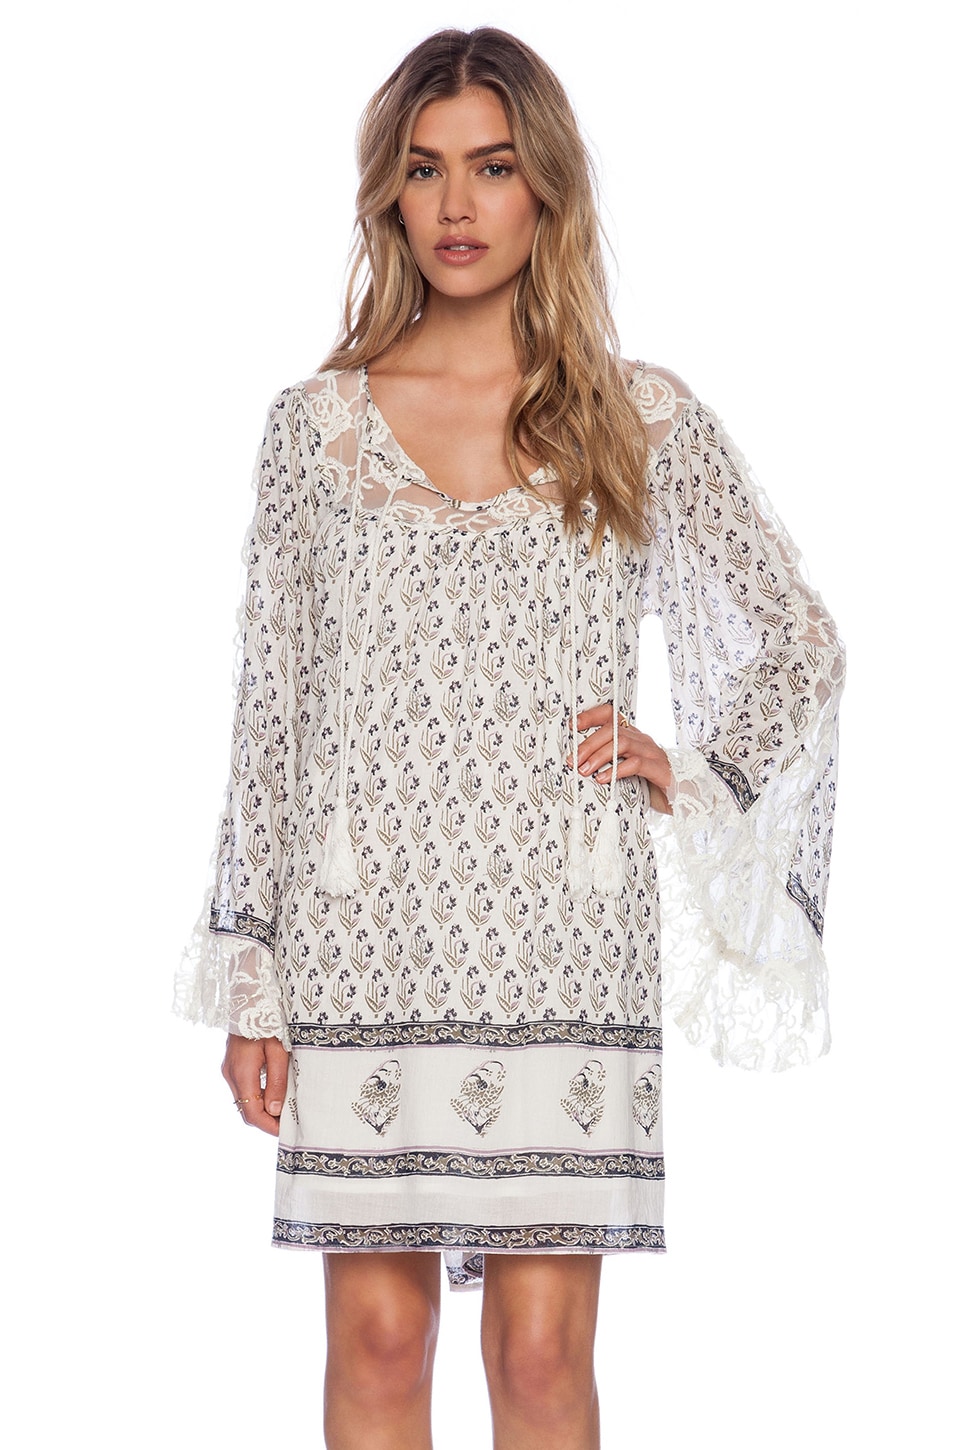 Free People Nomad Child Dress in Ivory Combo | REVOLVE